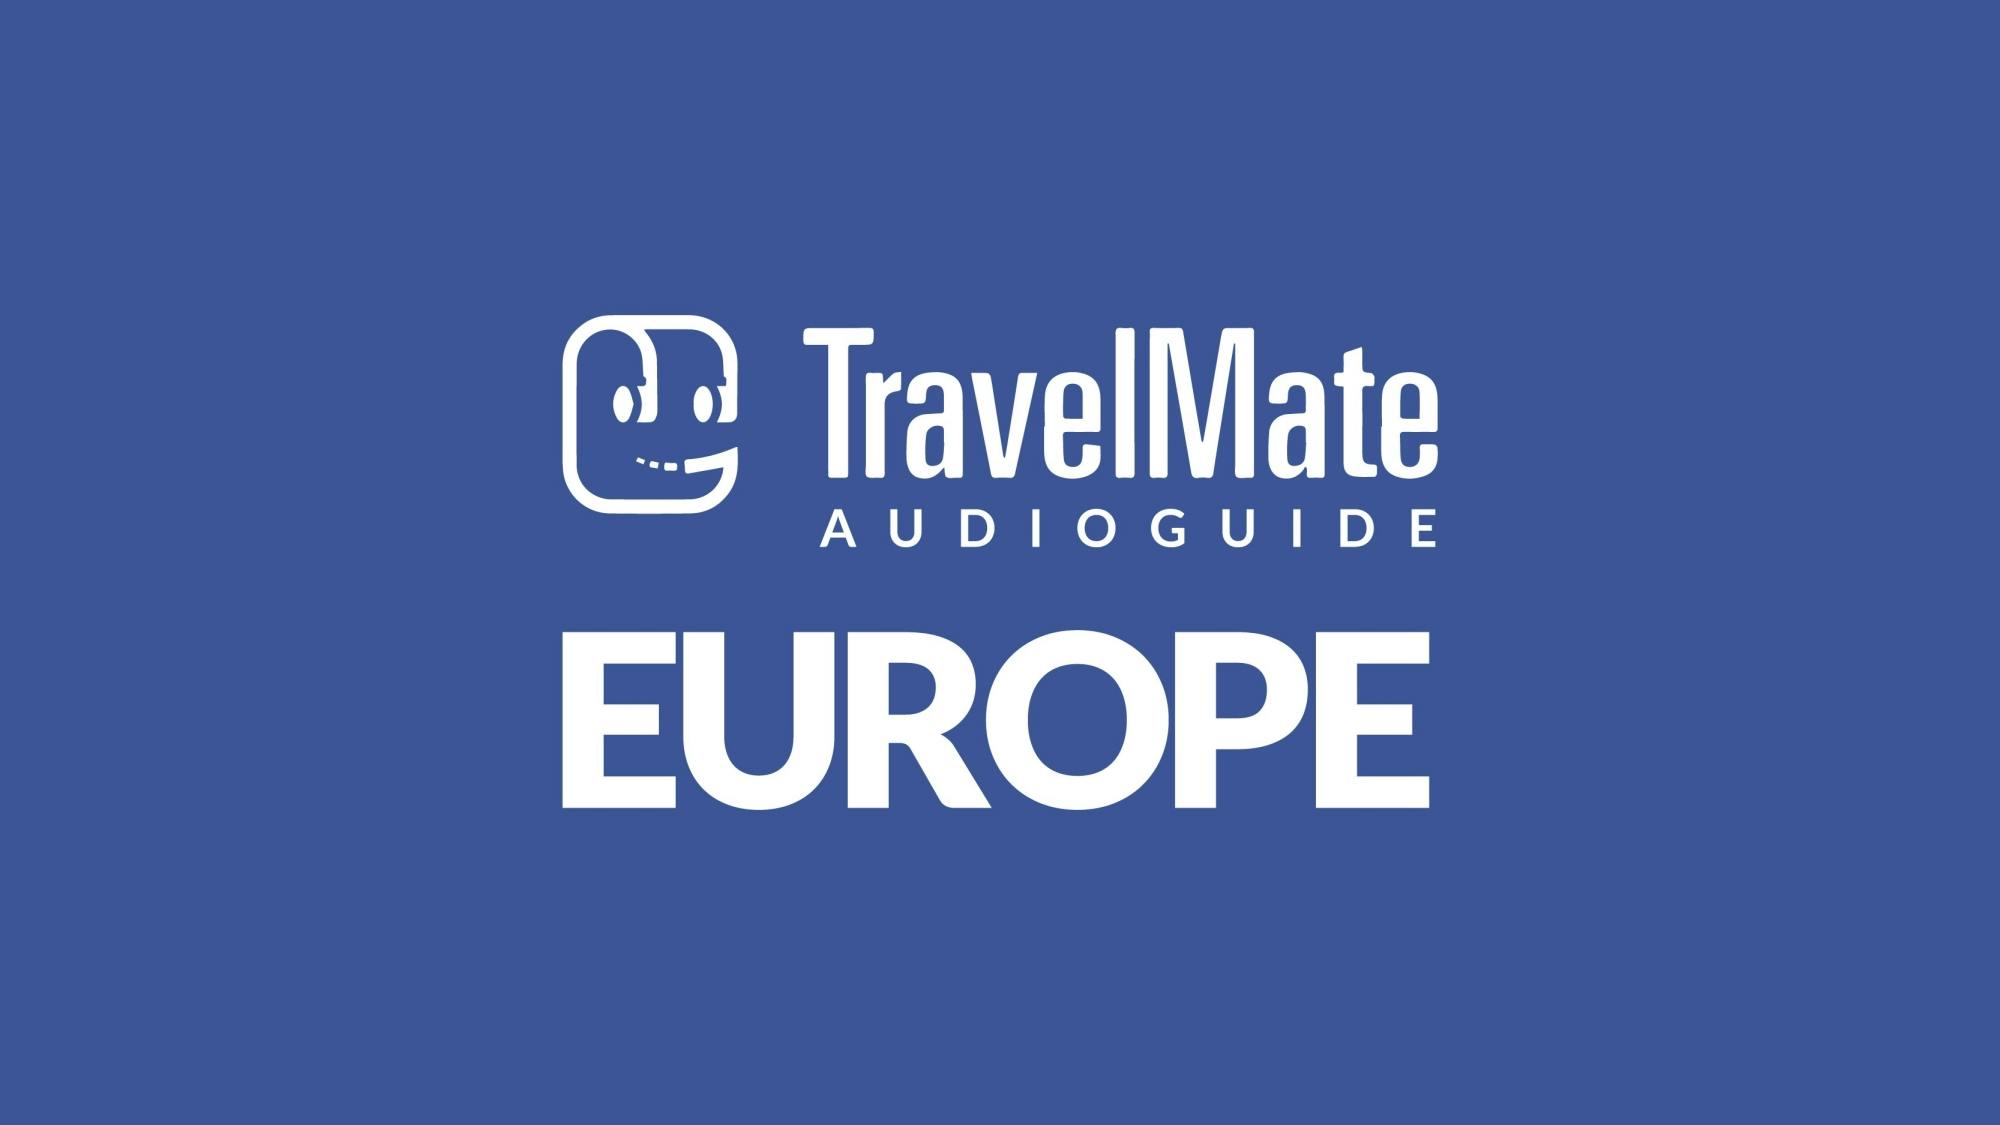 Europe audio guide with TravelMate app Musement